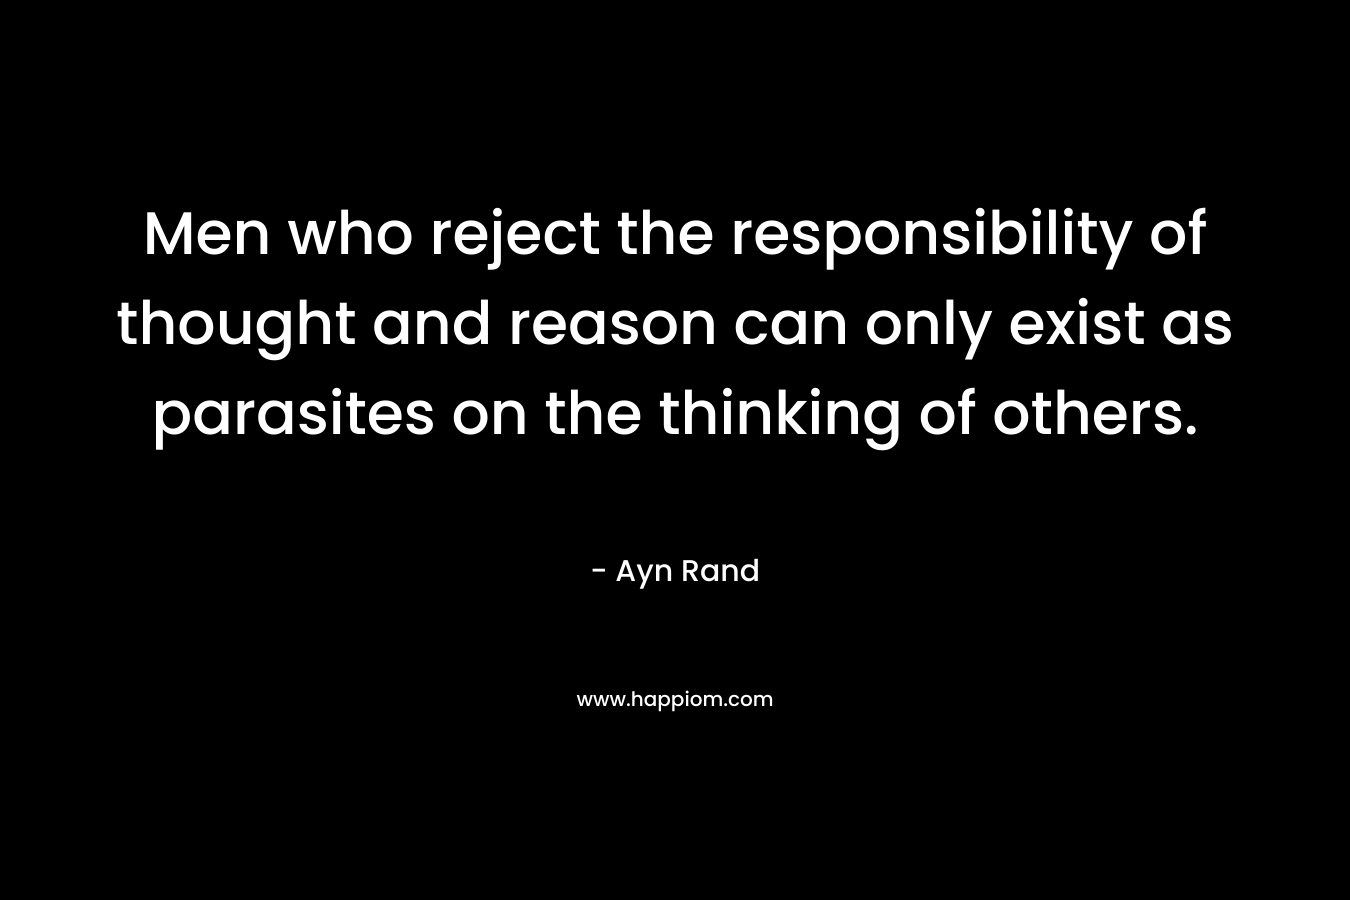 Men who reject the responsibility of thought and reason can only exist as parasites on the thinking of others. – Ayn Rand